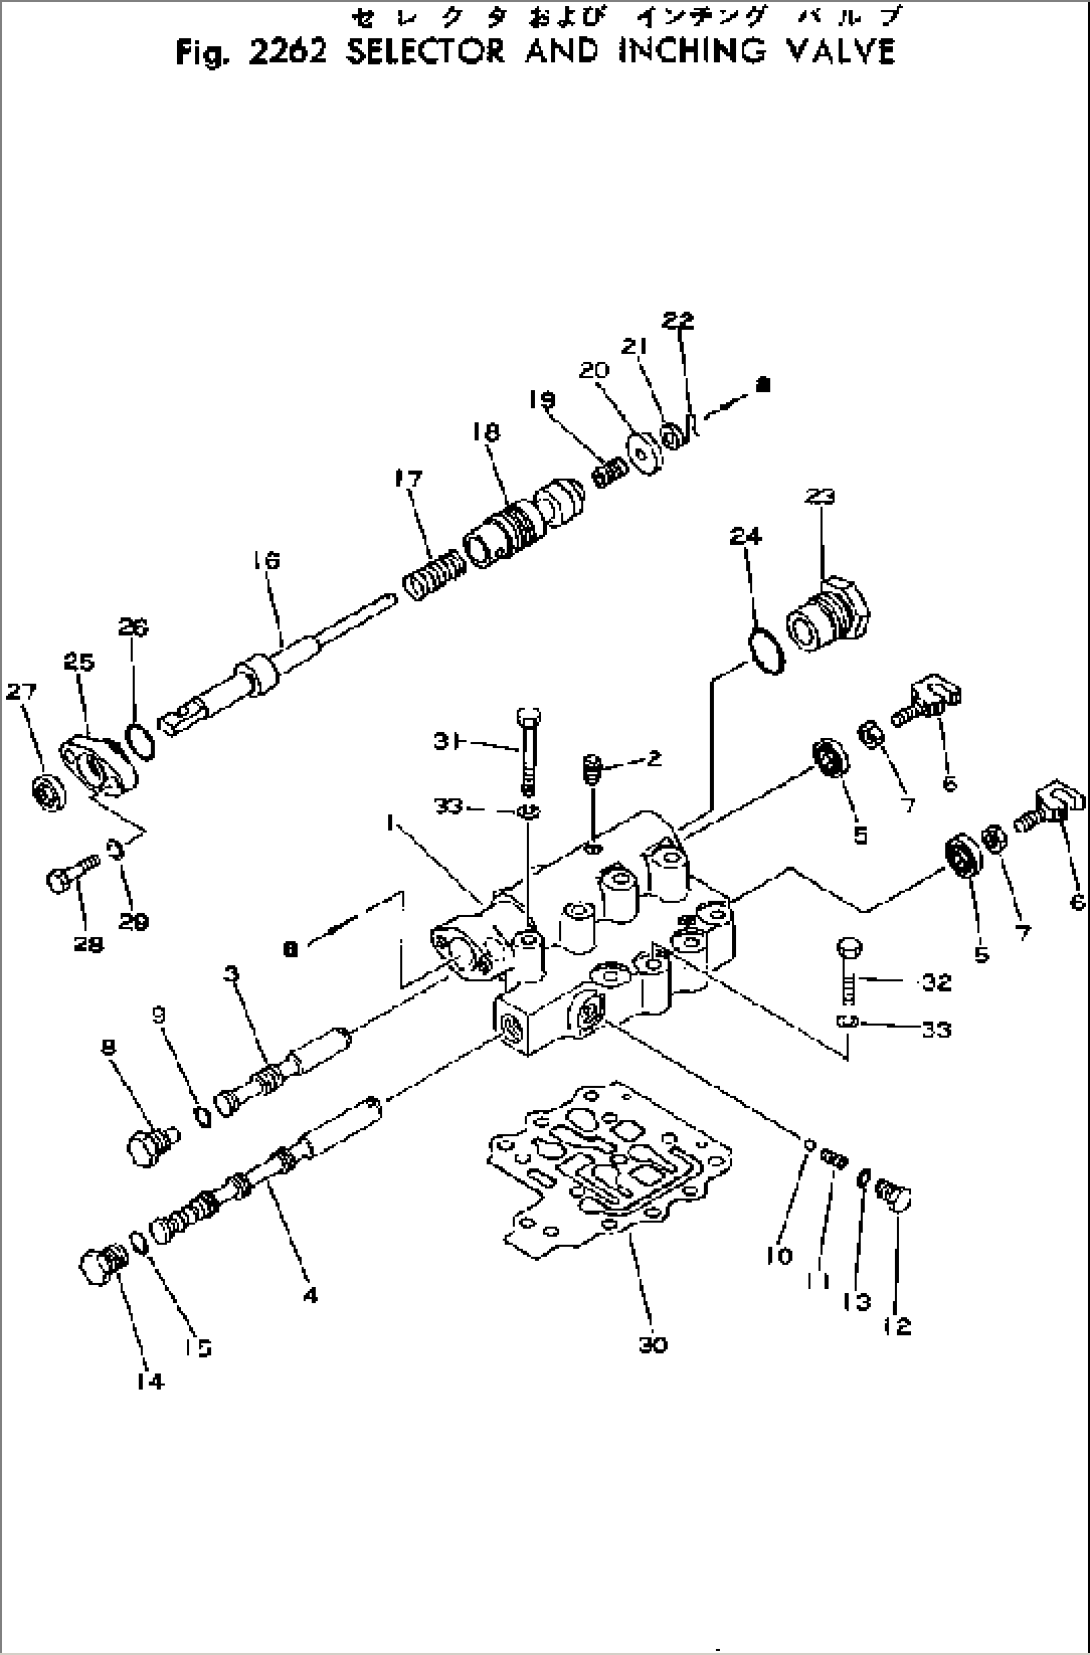 SELECTOR AND INCHING VALVE